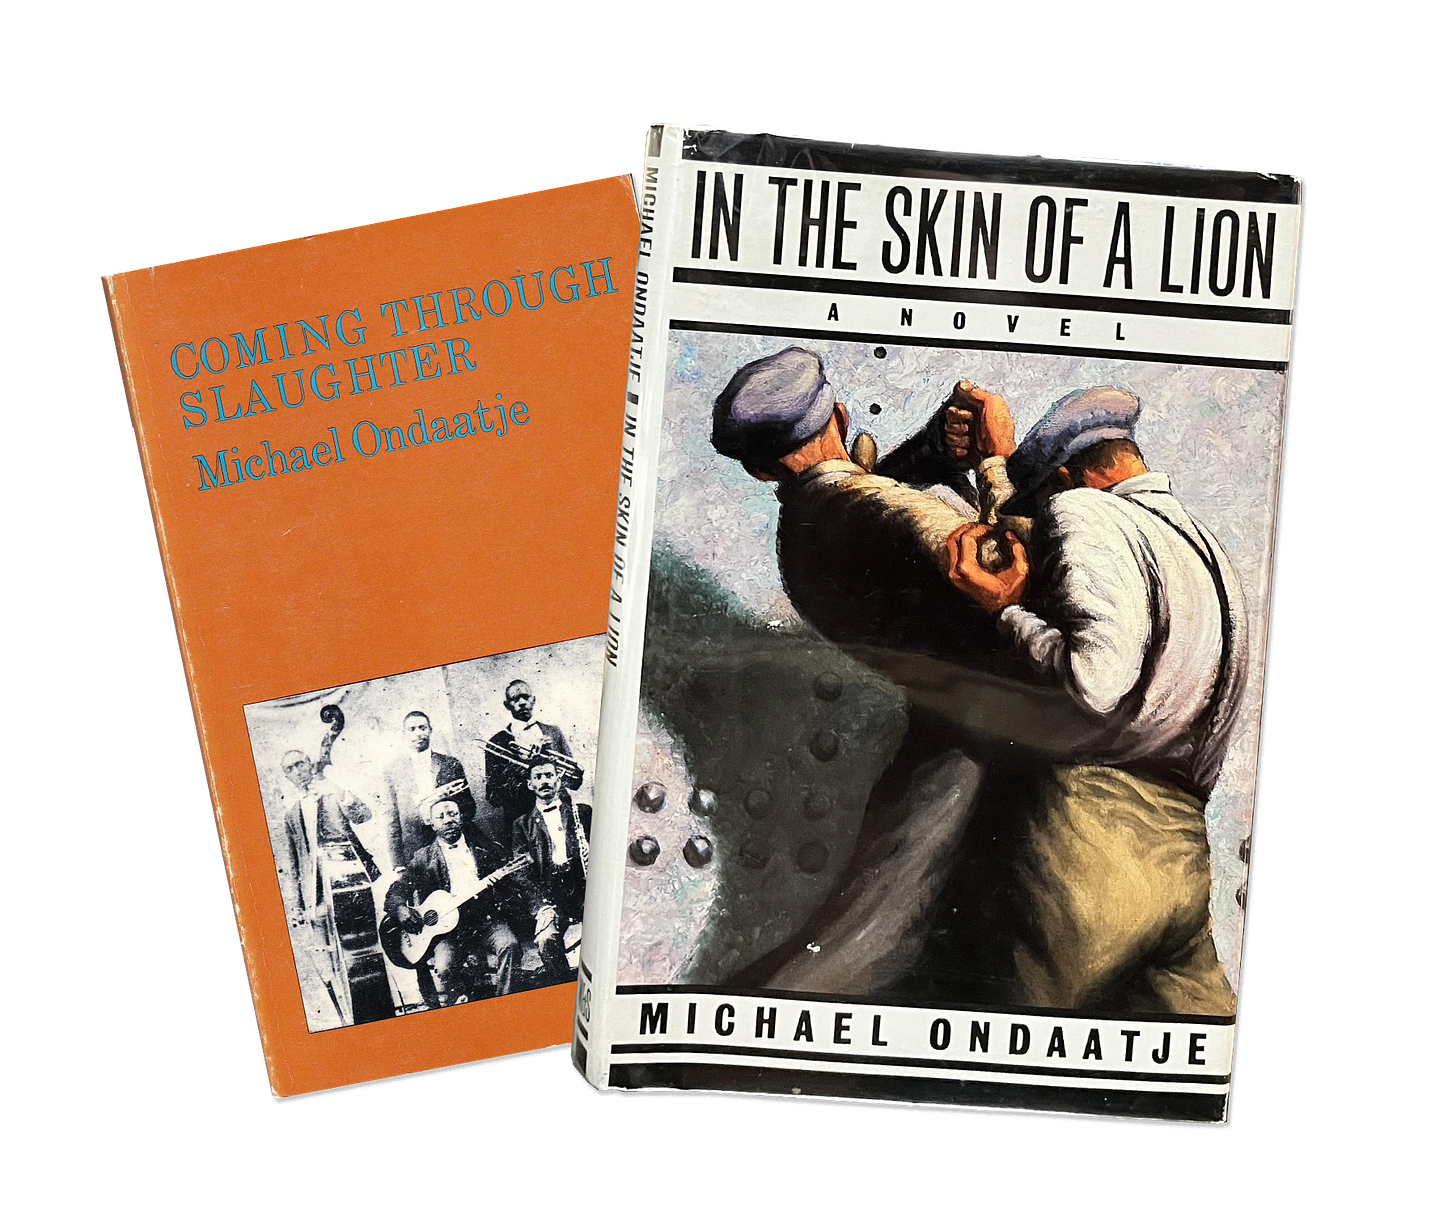 Covers of Michael Ondaatje’s first and second novels, Coming Through Slaughter (1976)           and In the Skin of a Lion (1987).